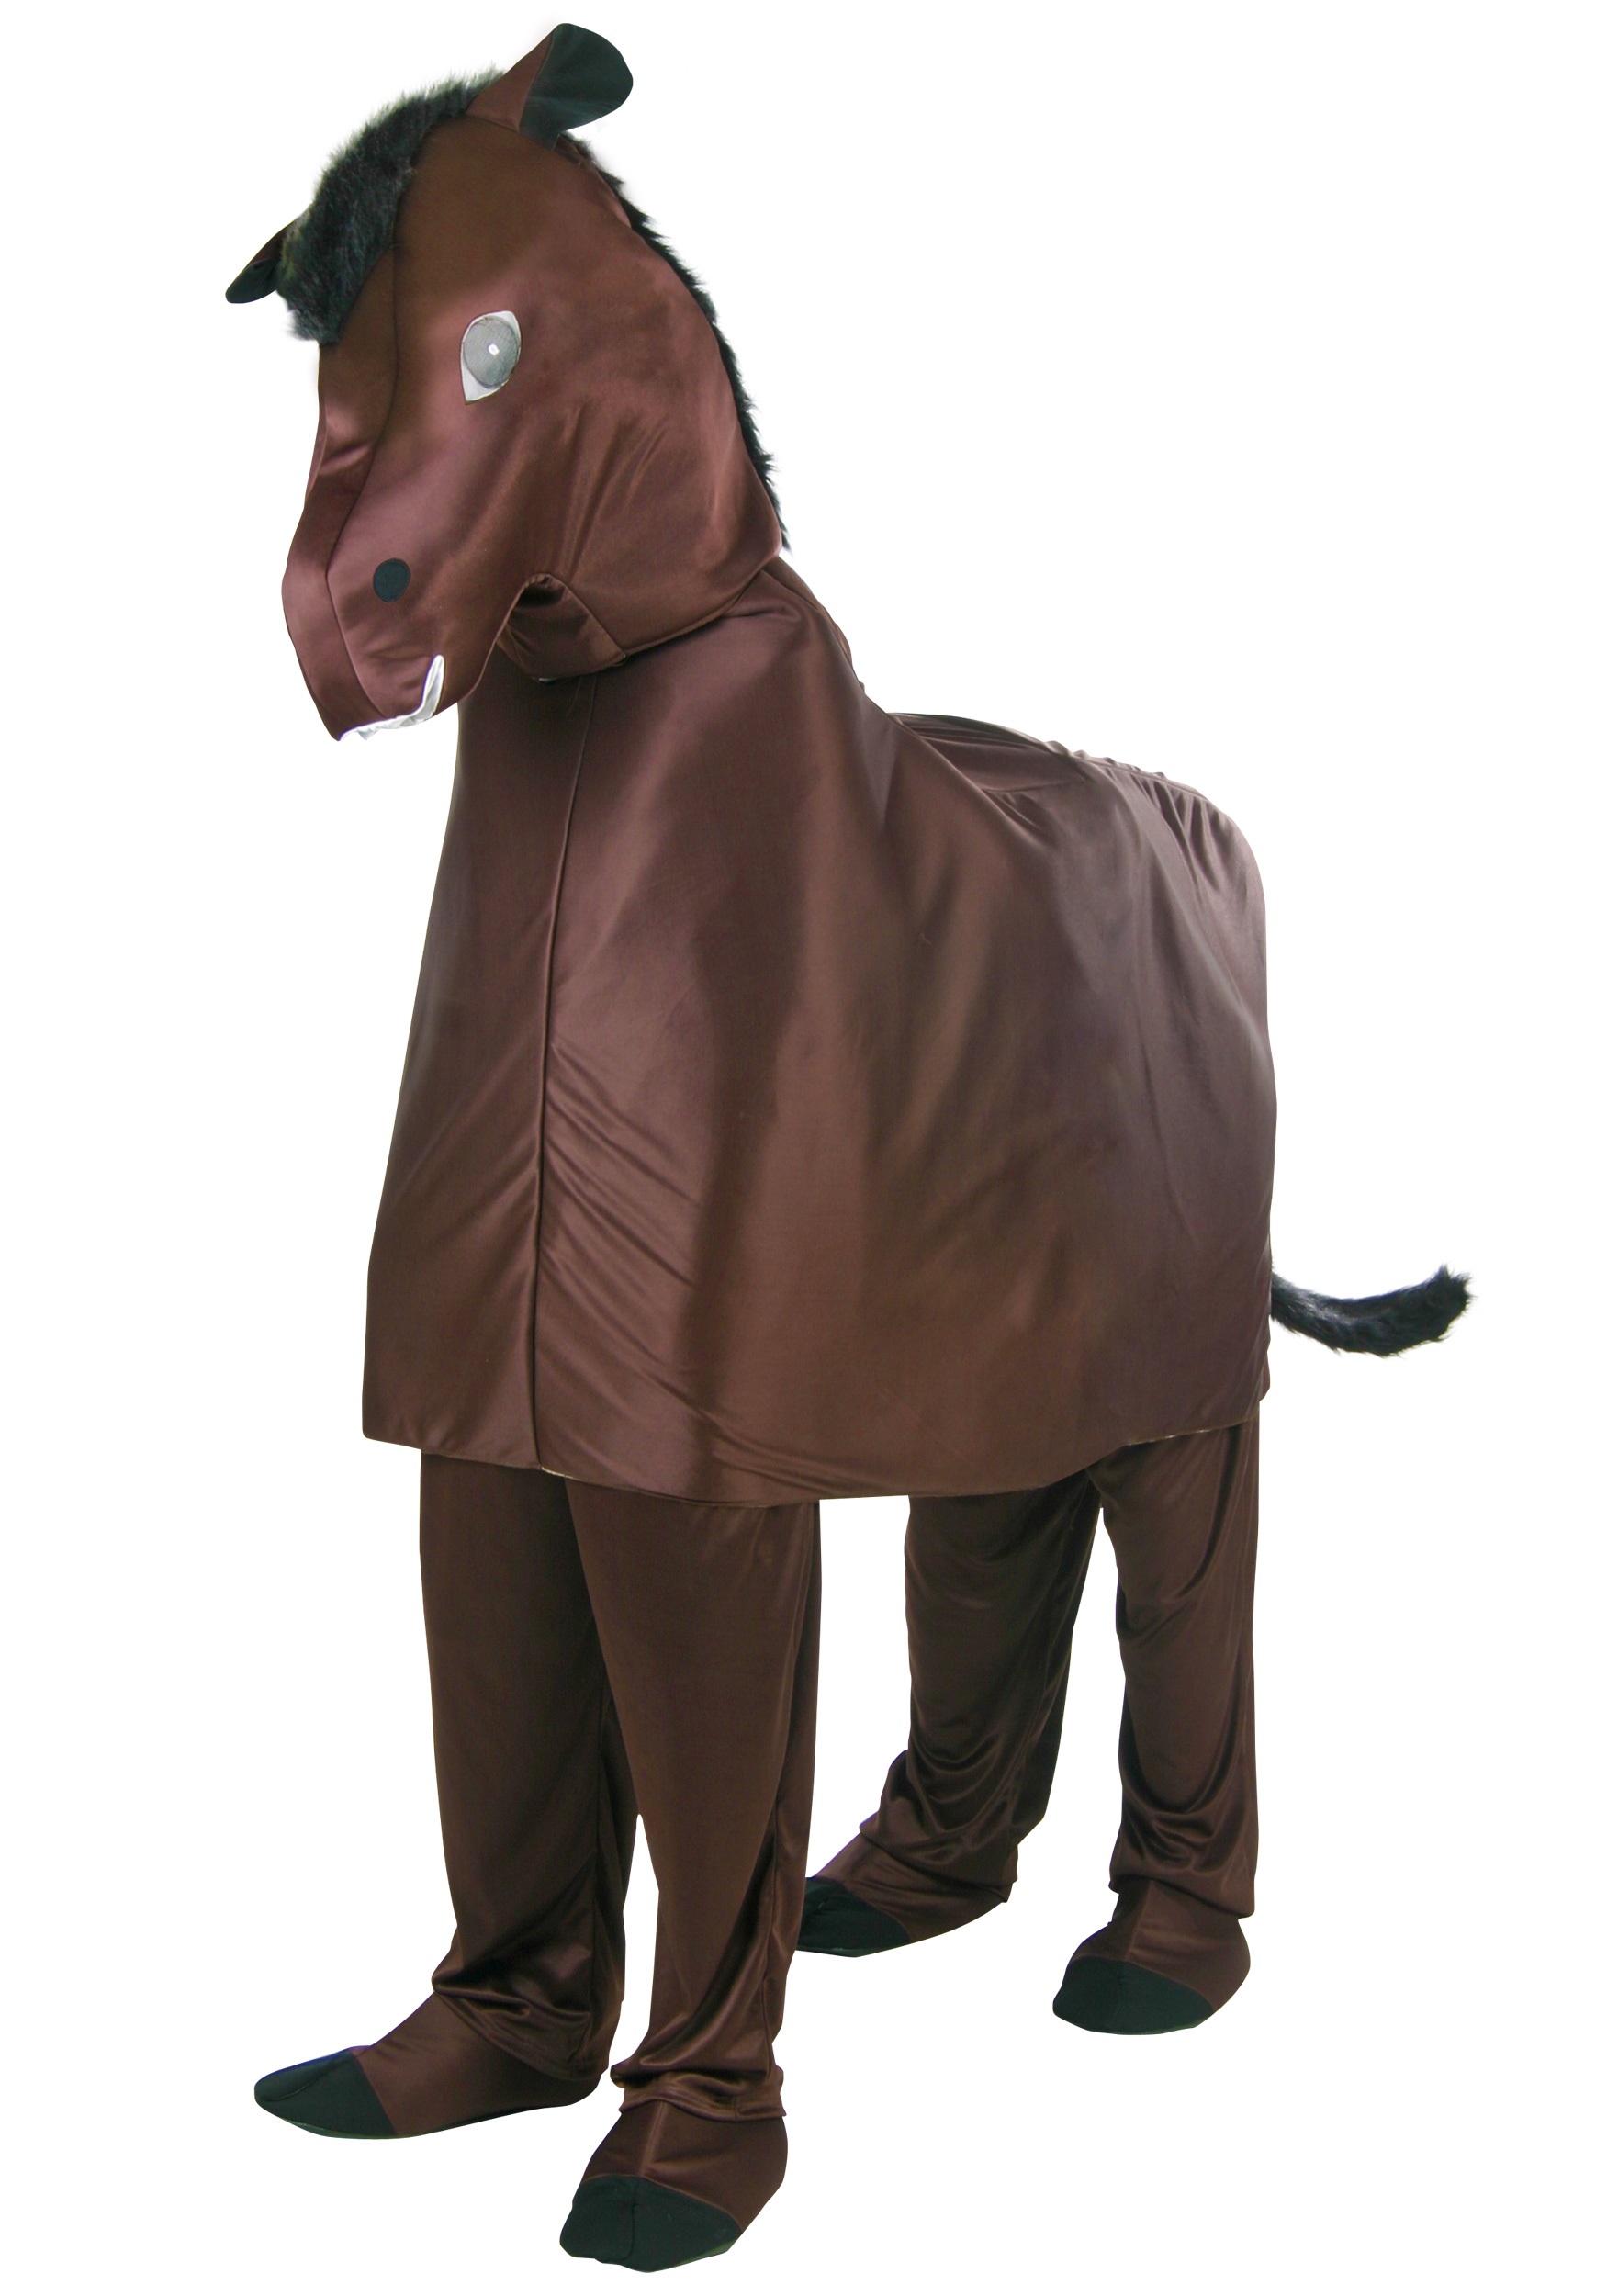 Supremask Horse Costume Funny Horse Head Costume Novelty Animal Costume Halloween Costumes Brown Horse 